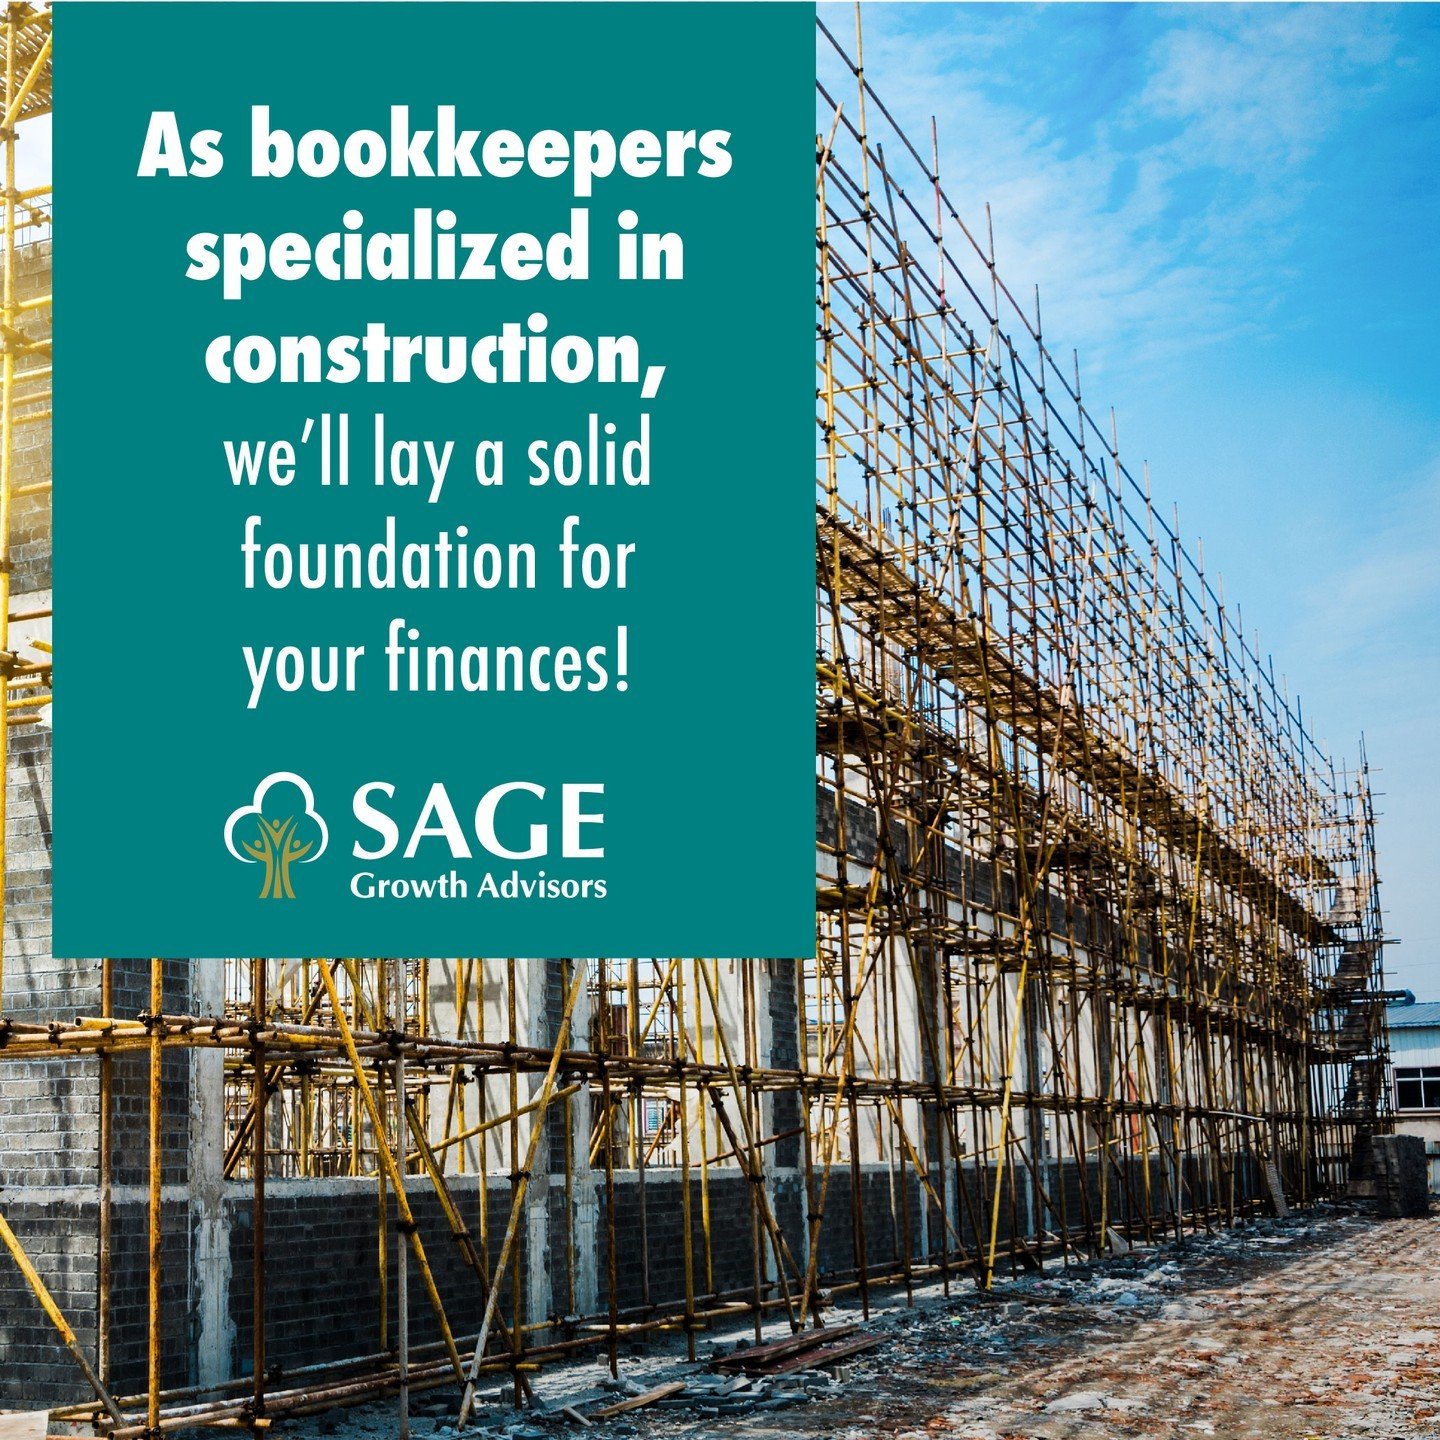 Hey #CONSTRUCTION 🛠️ owners!! Want to build more than just structures? Let&rsquo;s talk about laying a solid foundation for your #finances 💰! 

As #bookkeepers specialized in construction, we help you nail 🔨 down your number (haha), so you can foc